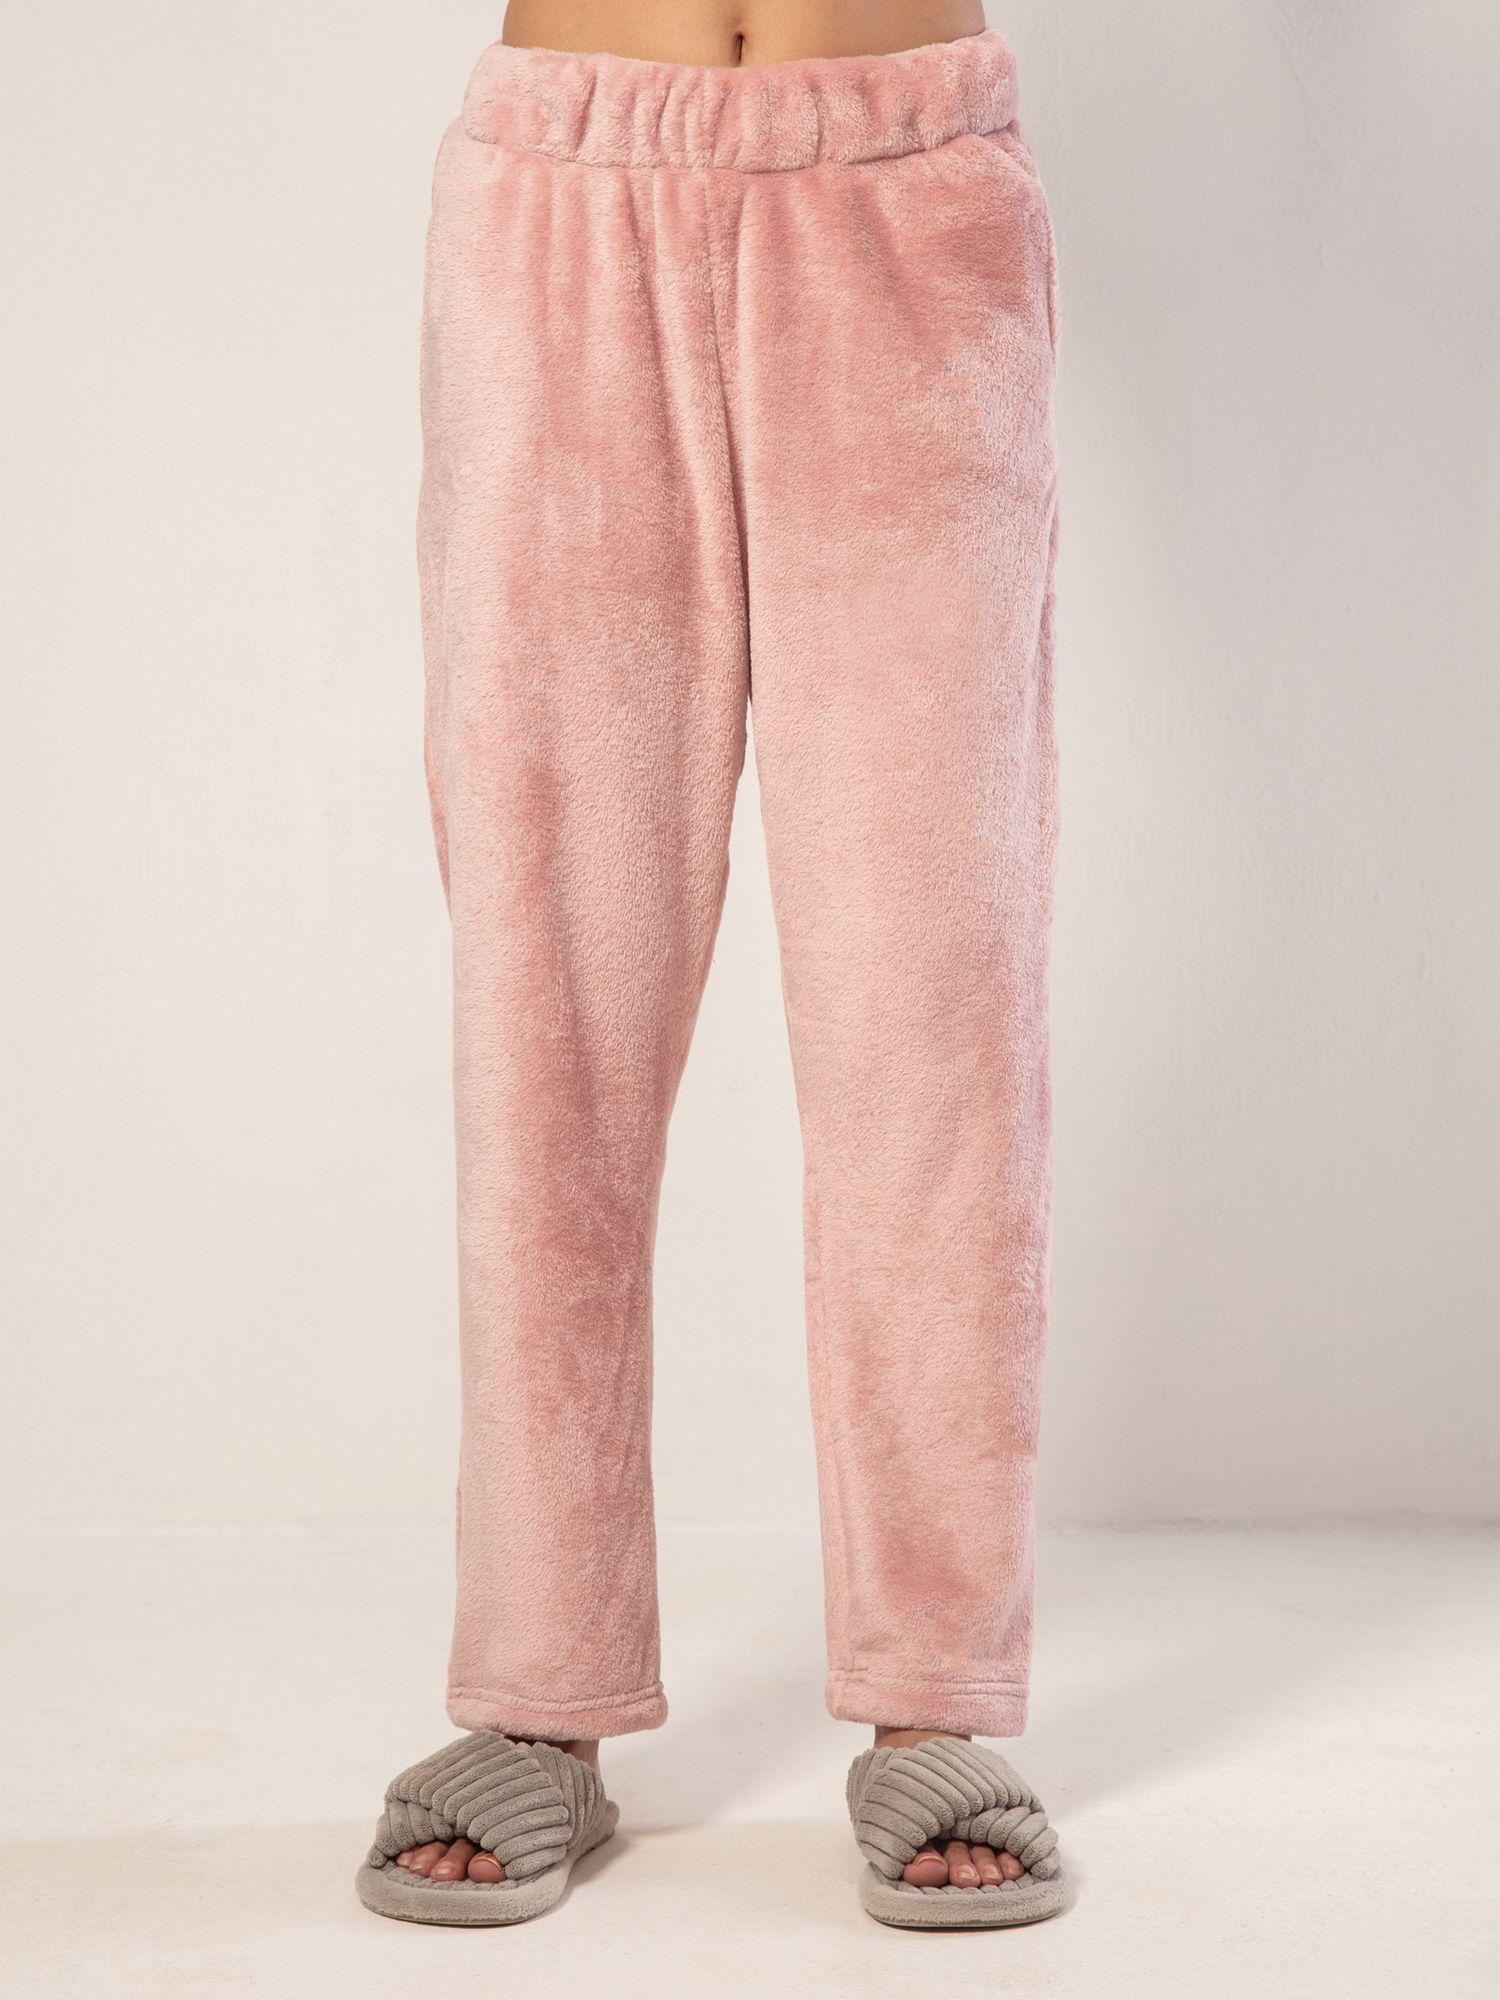 luxe fur lounge pants- peach whip nys121